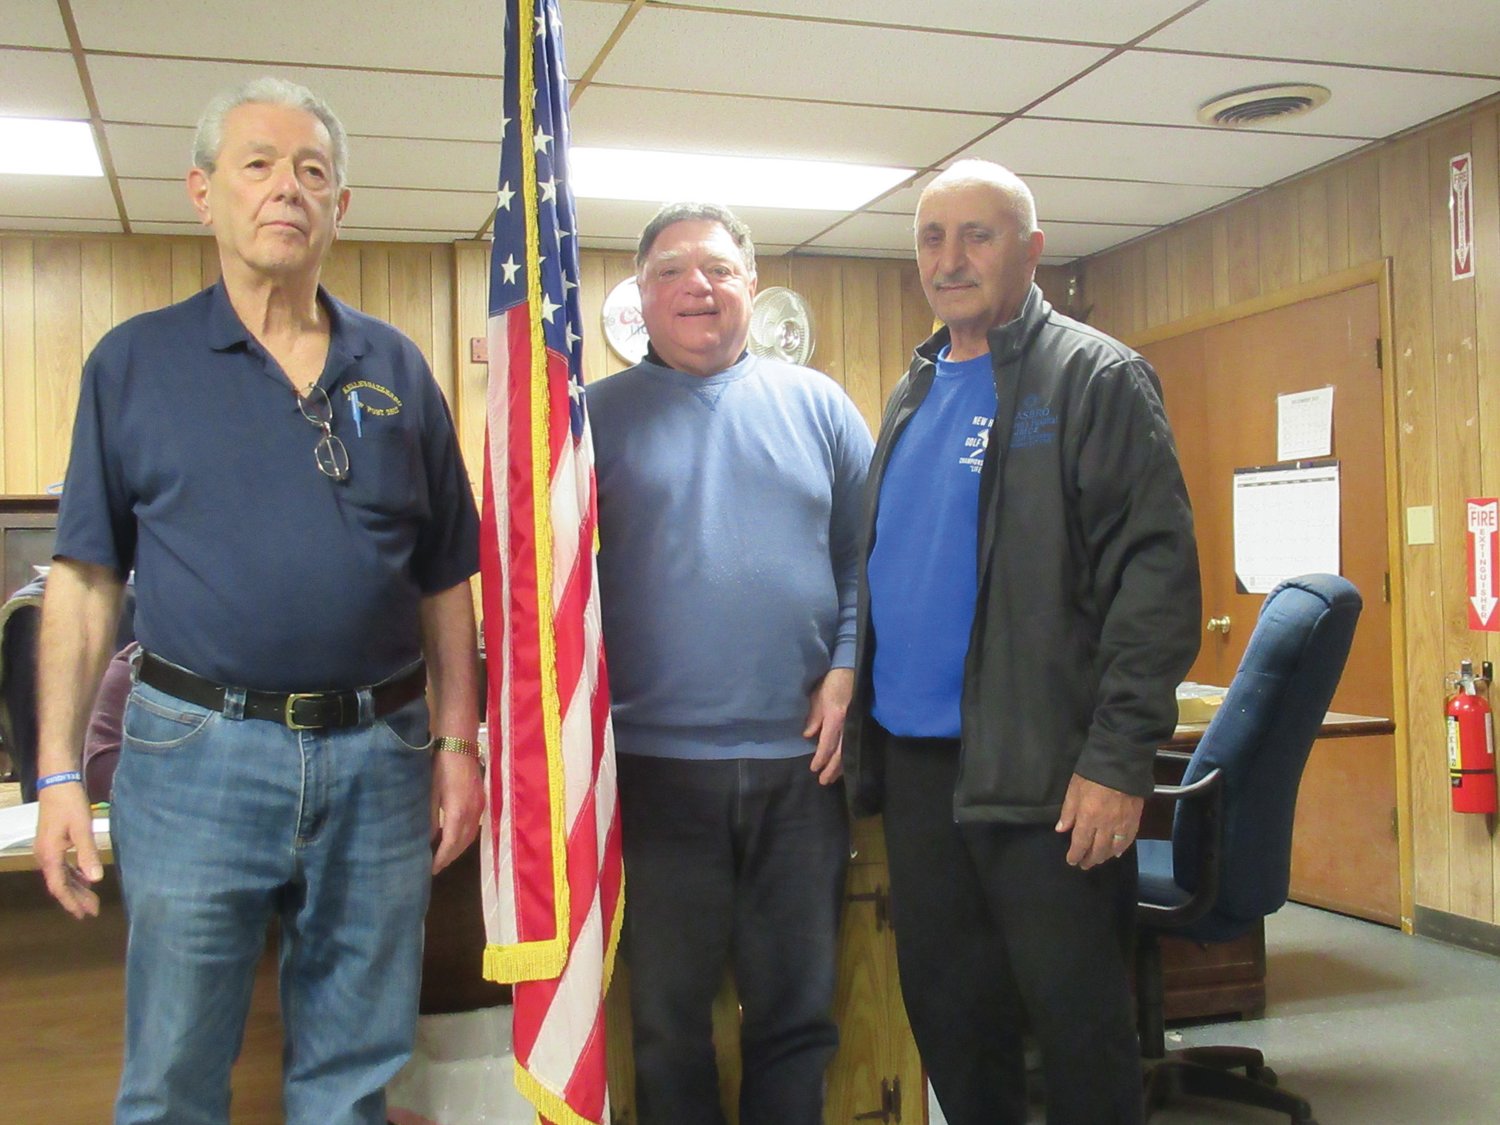 HONORED HOST: Ron Ricci (left), the Building Committee Chairman at the famed Kelley-Gazzerrro VFW Post, joins Steve Placella (center) and Vin LaFazia, co-chairmen of the Ricky Salzillo Memorial Game Dinner, during discussion of safety guidelines for the Feb. 6 event.